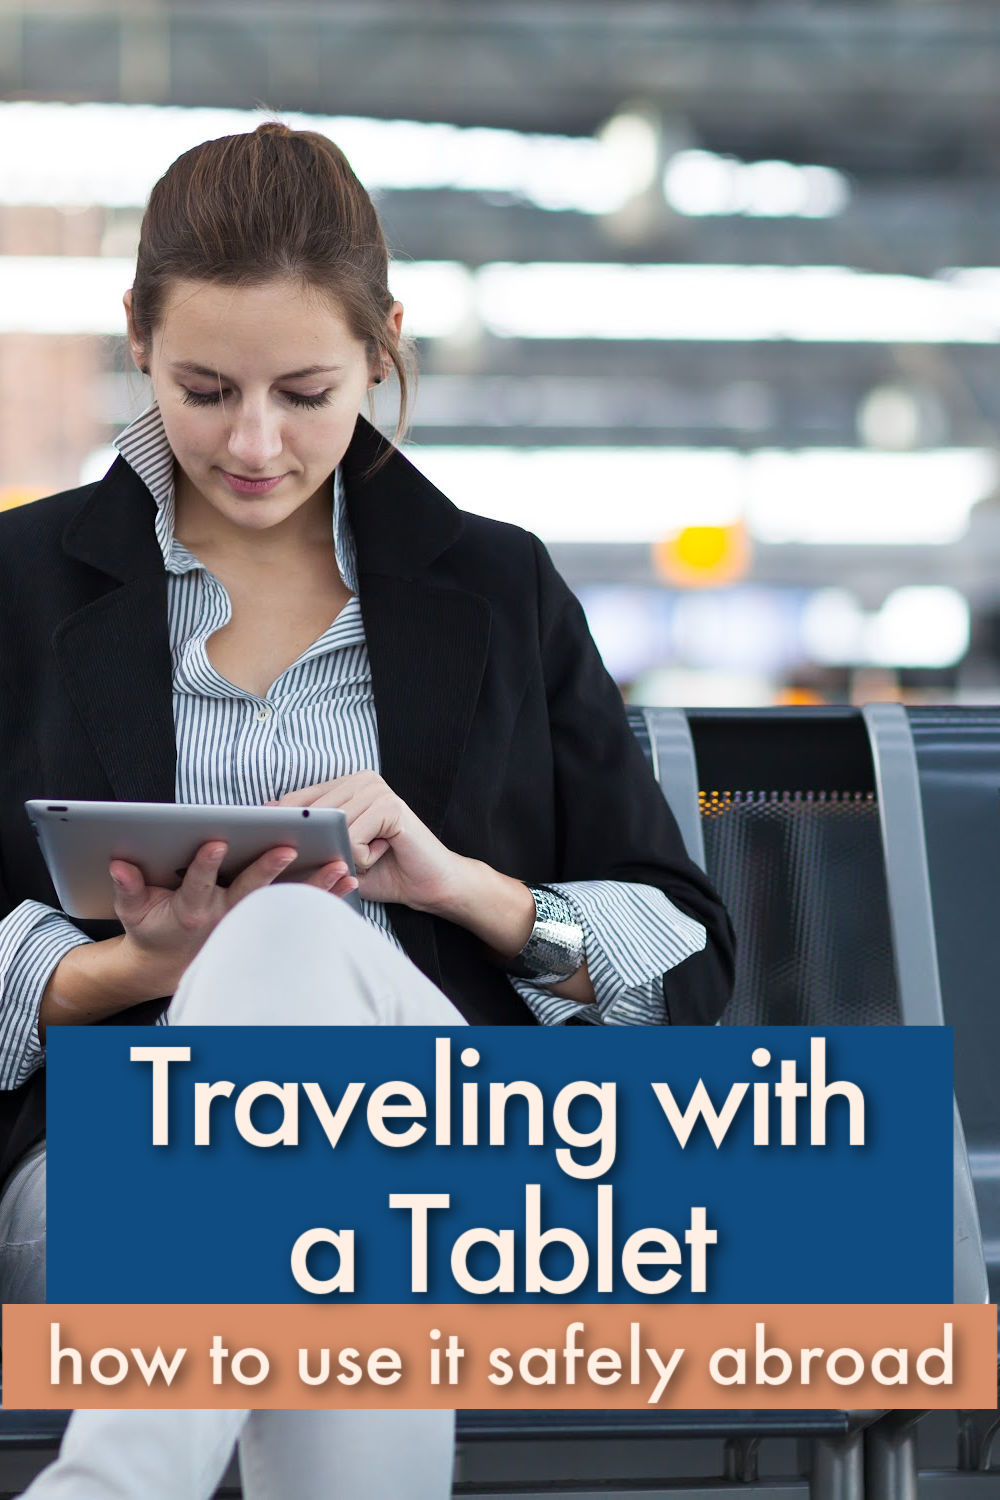 All you need to know about traveling with a laptop is here!How to choose the best travel tablet, airport security tips, packing, tablet VPNs, tips for connecting to the internet abroad with safety, and more. Tablet for travel | tablet on airport | tablet VPN | tablet security. 